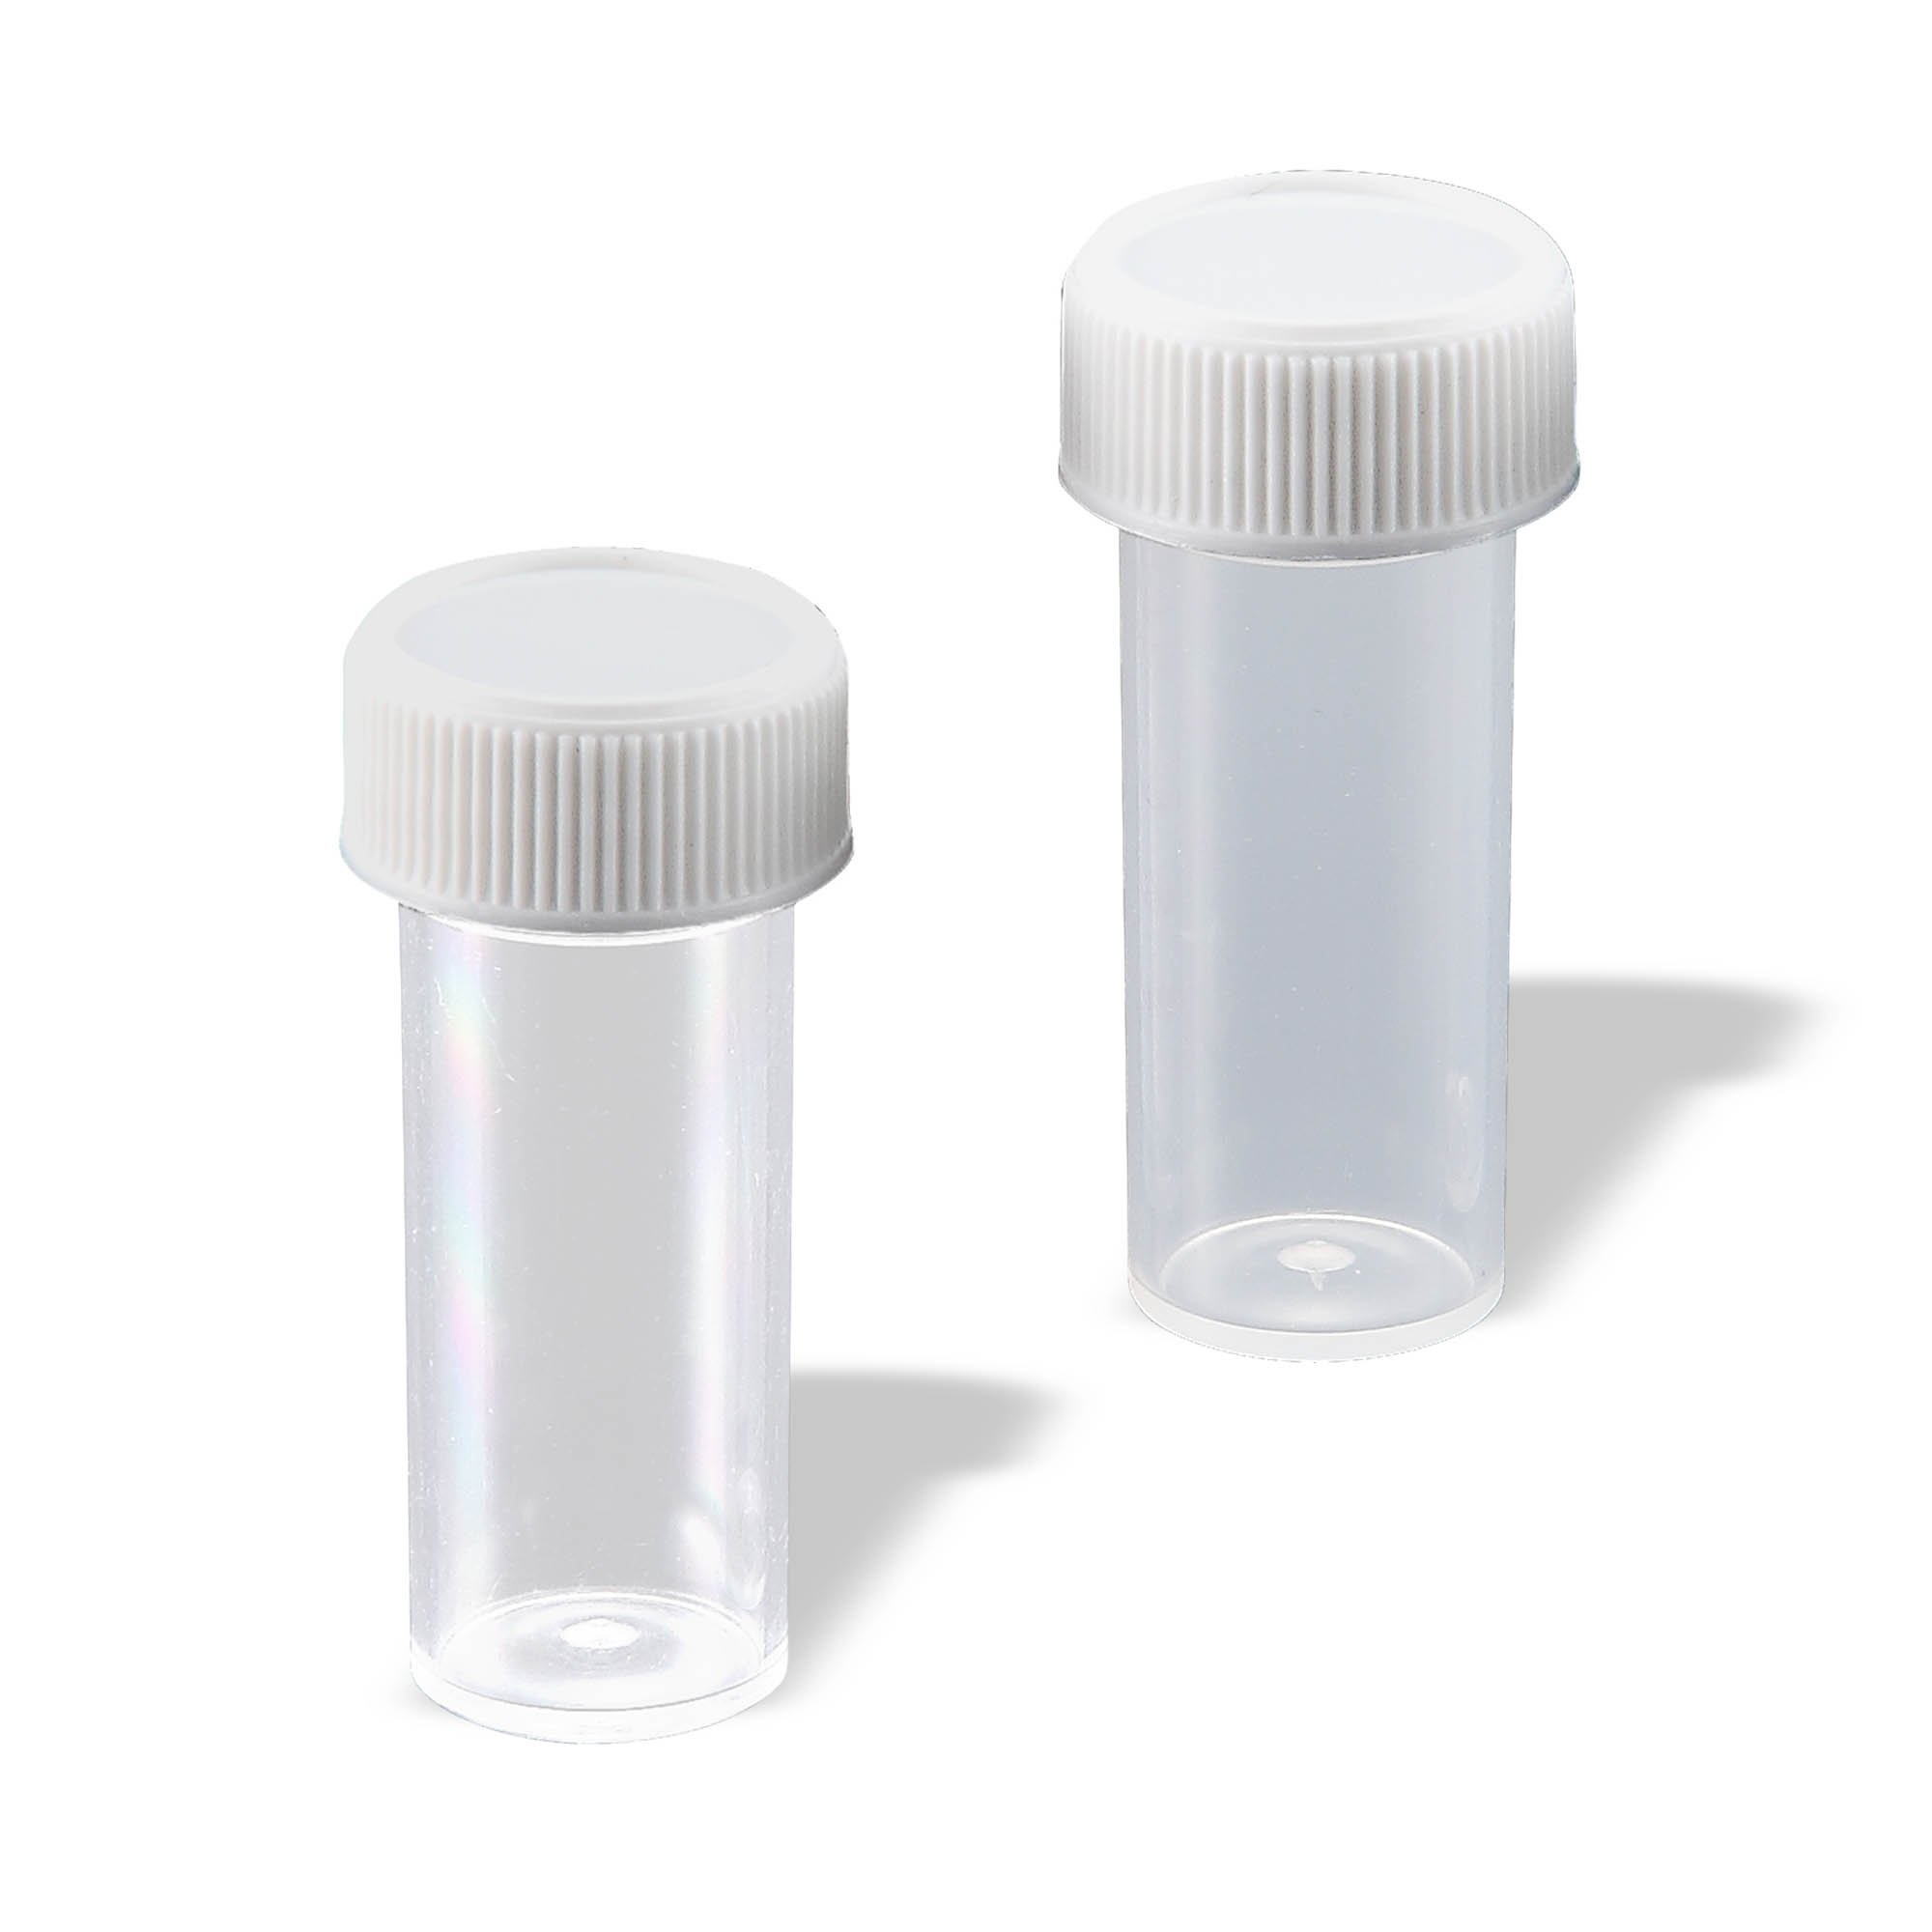 PP-5307 Screw Tops - Small Threaded Vials and Caps